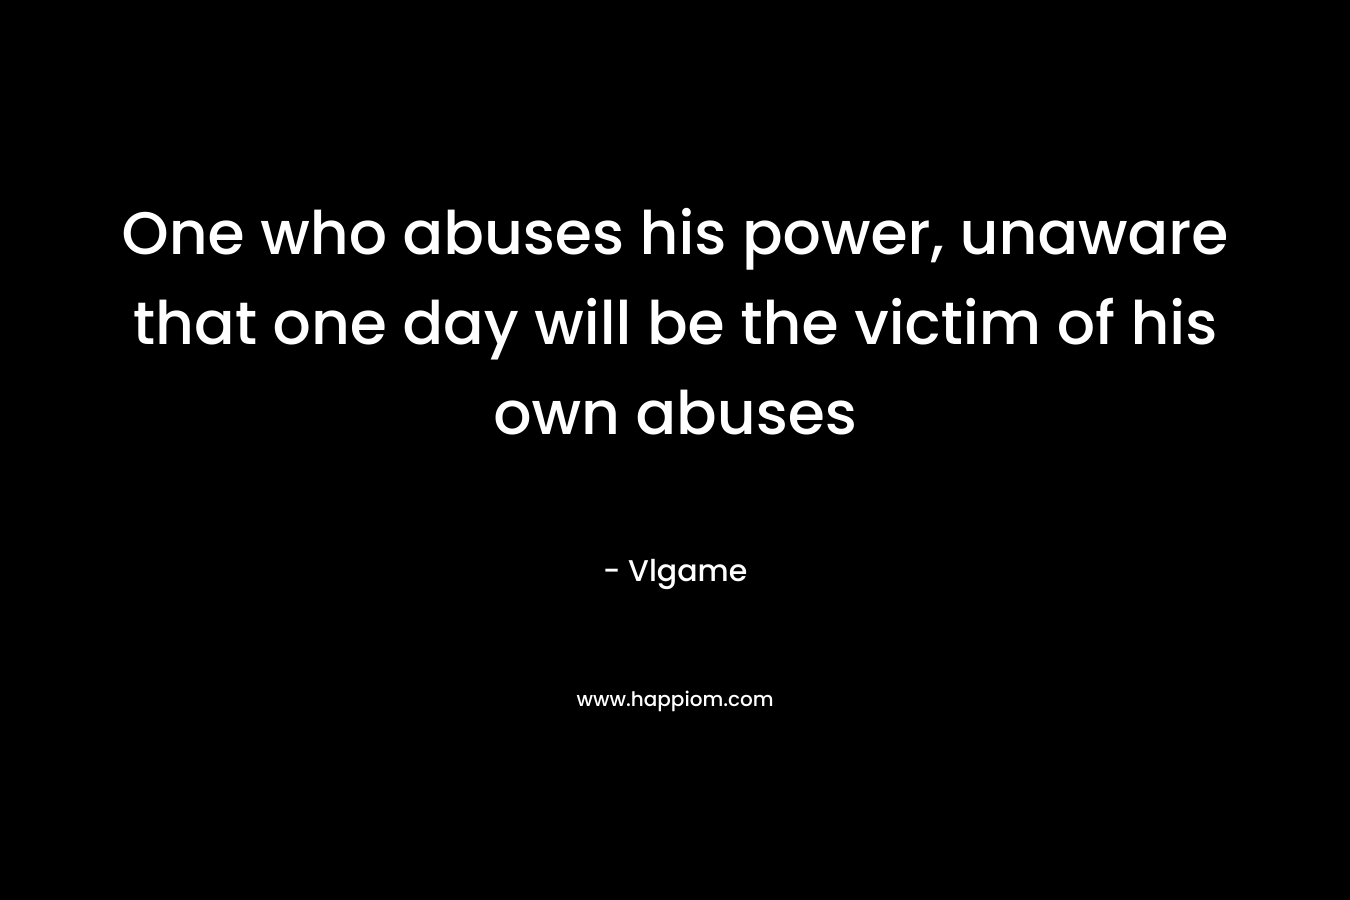 One who abuses his power, unaware that one day will be the victim of his own abuses – Vlgame